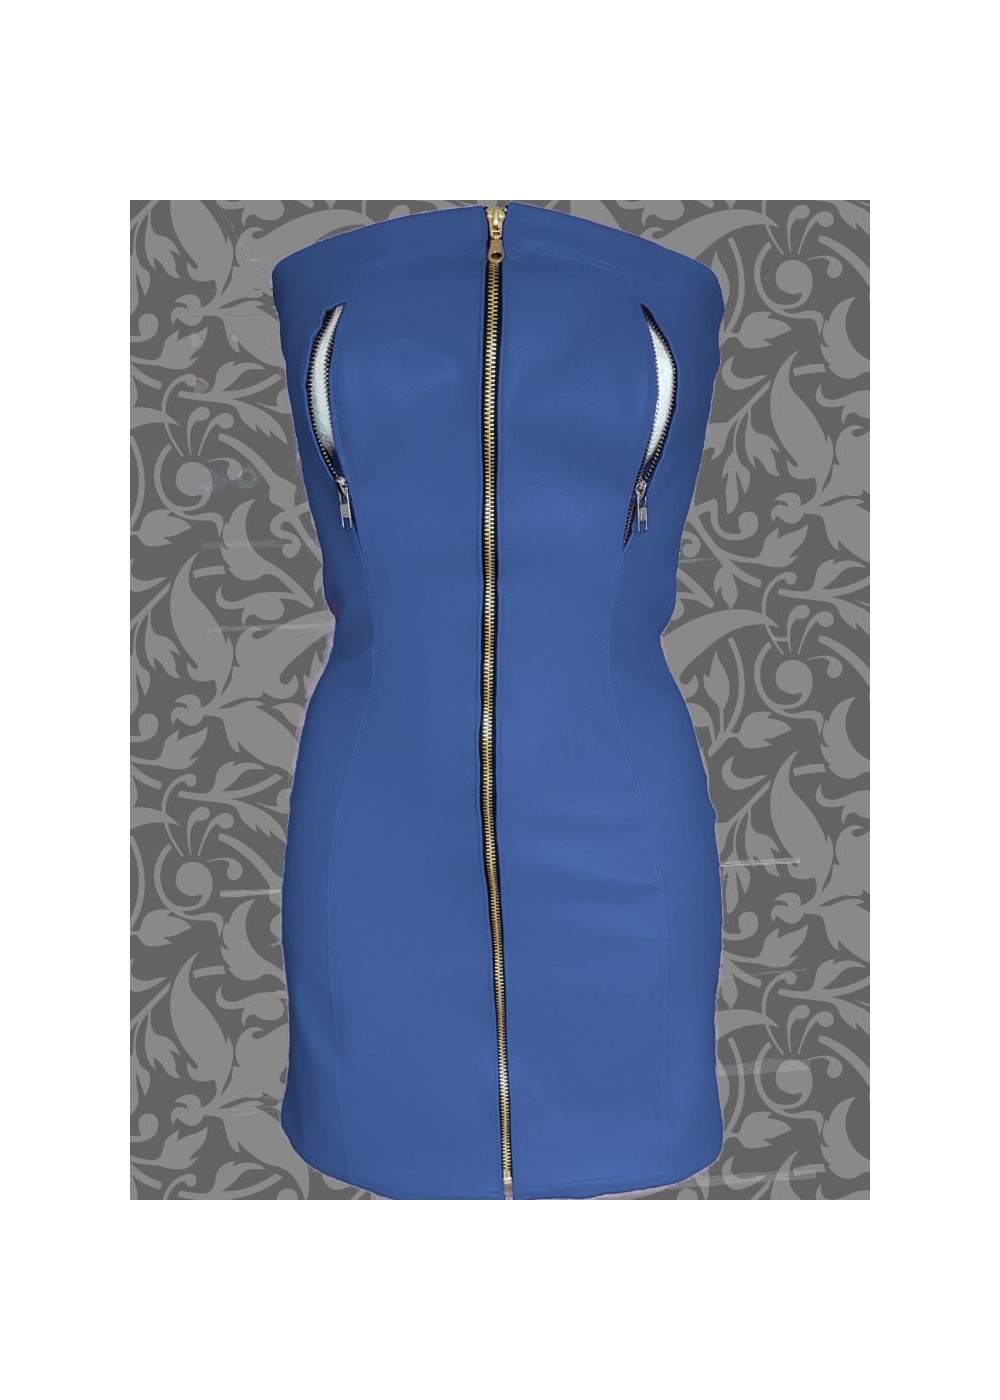 Nipple free soft leather dress blue with zippers - 